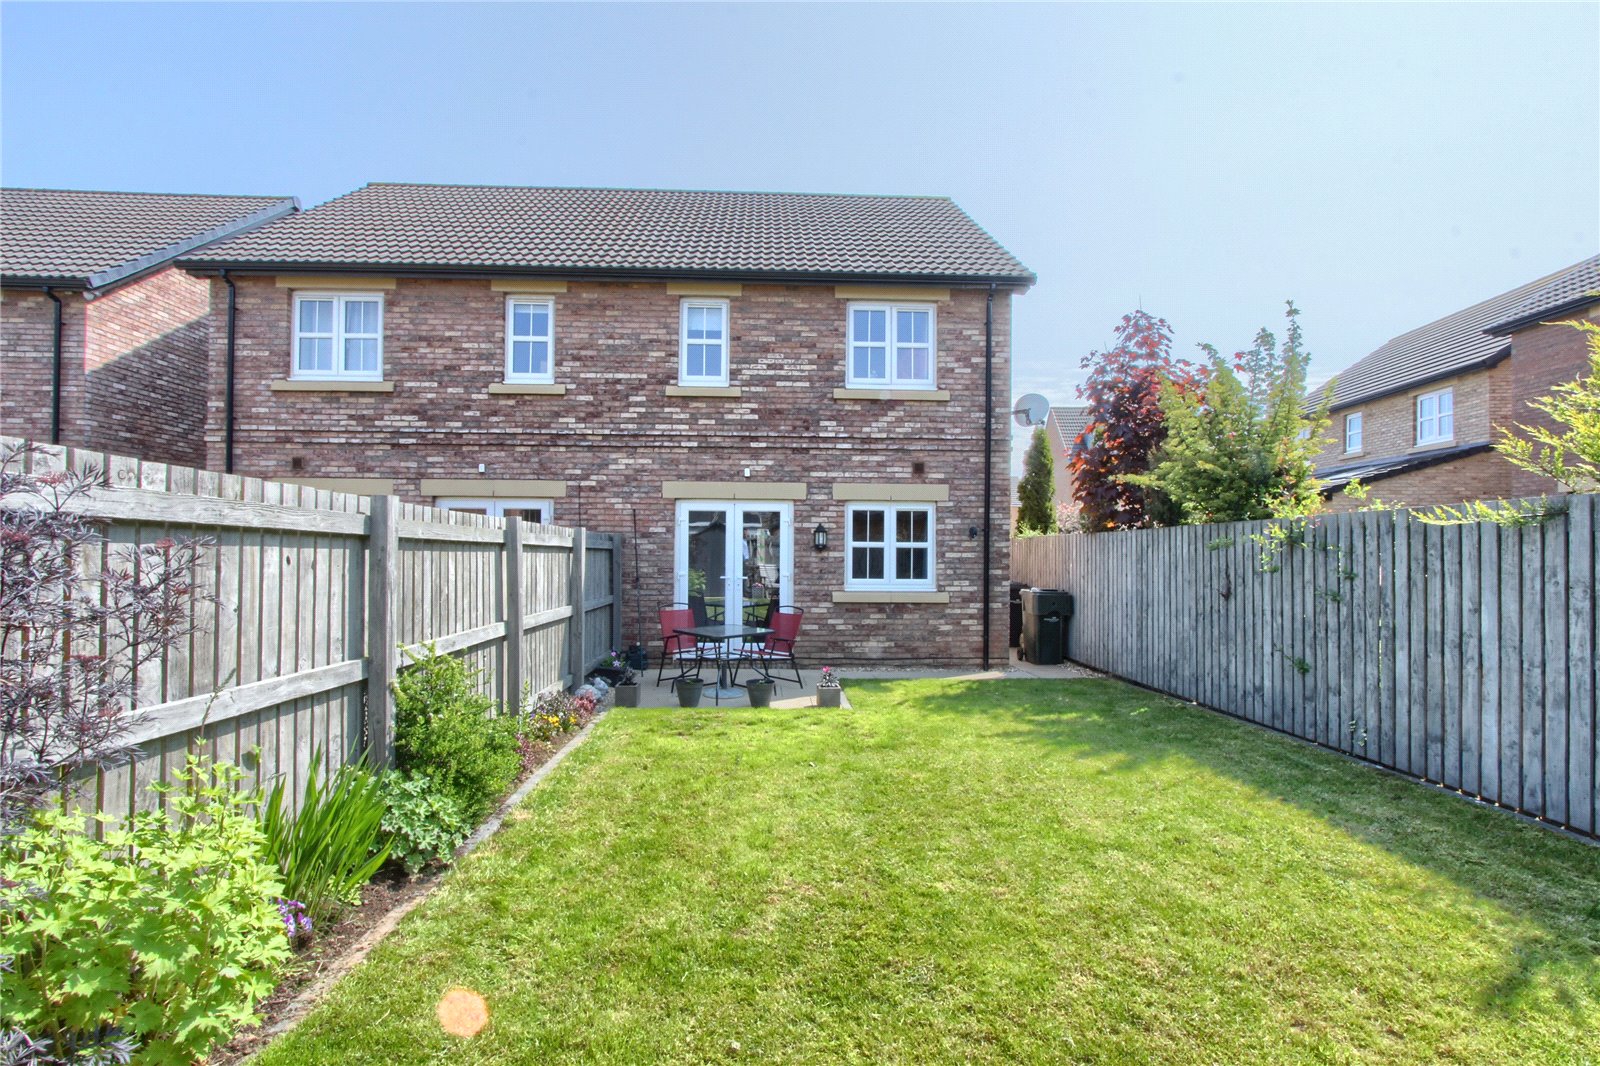 3 bed house for sale in Jocelyn Way, Stainsby Hall  - Property Image 10